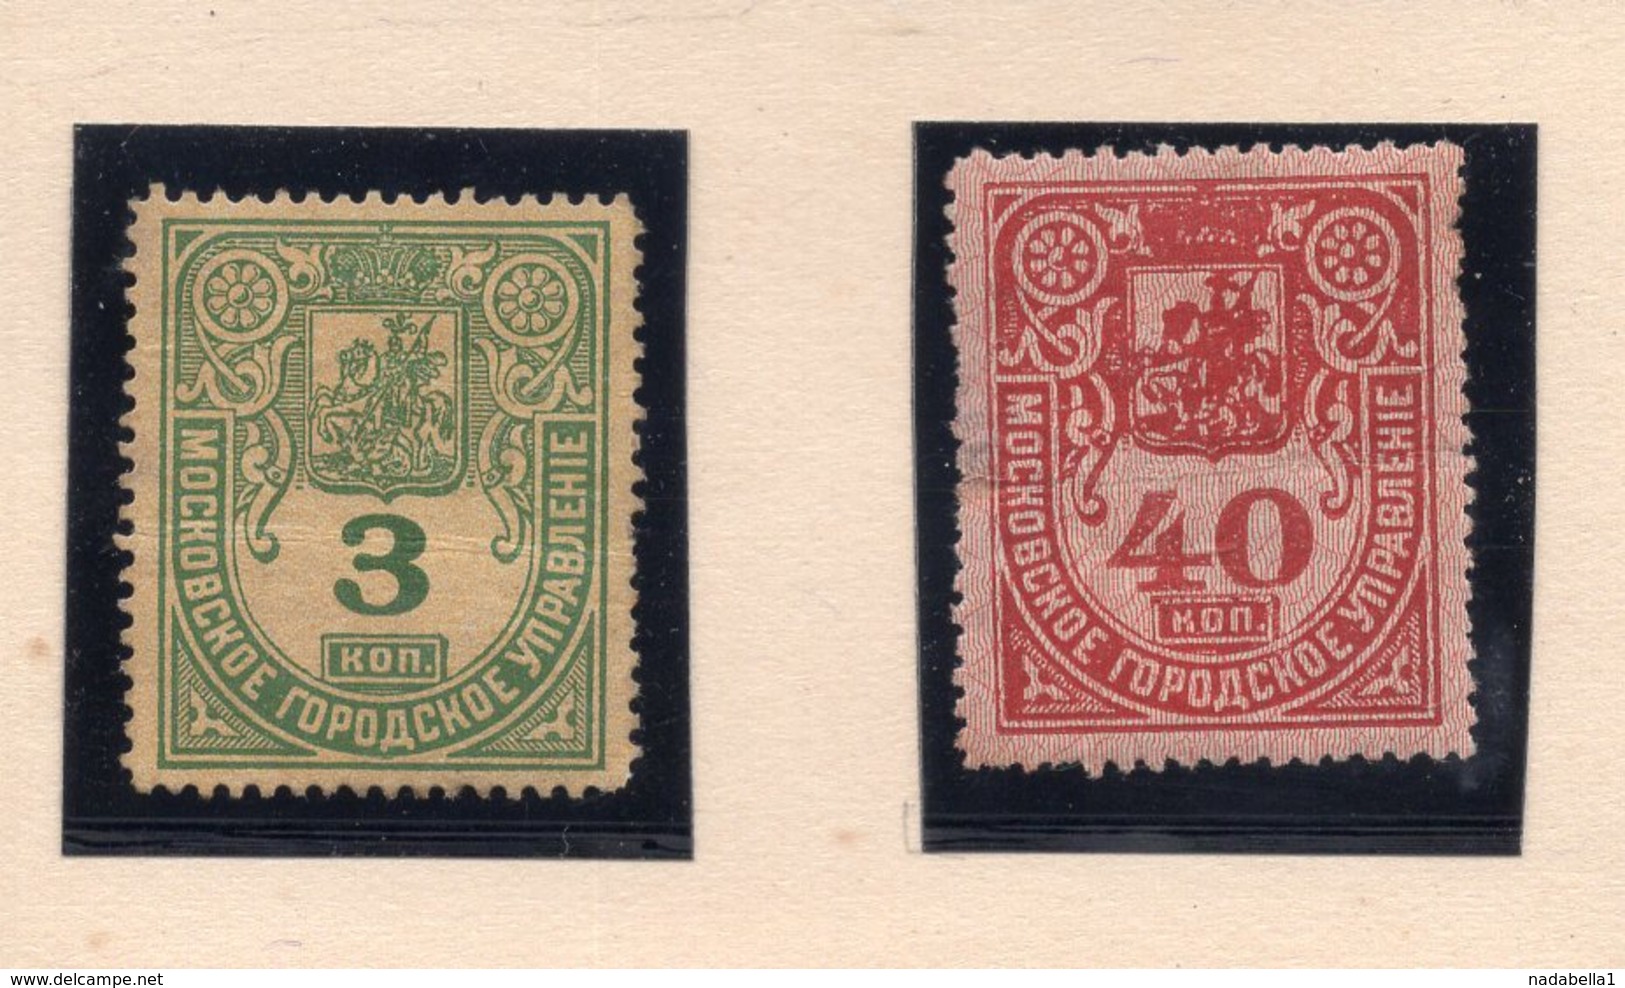 RUSSIA, MOSCOW, MUNICIPAL REVENUE STAMPS, 3 & 40 KOPEIKA, MH - Steuermarken